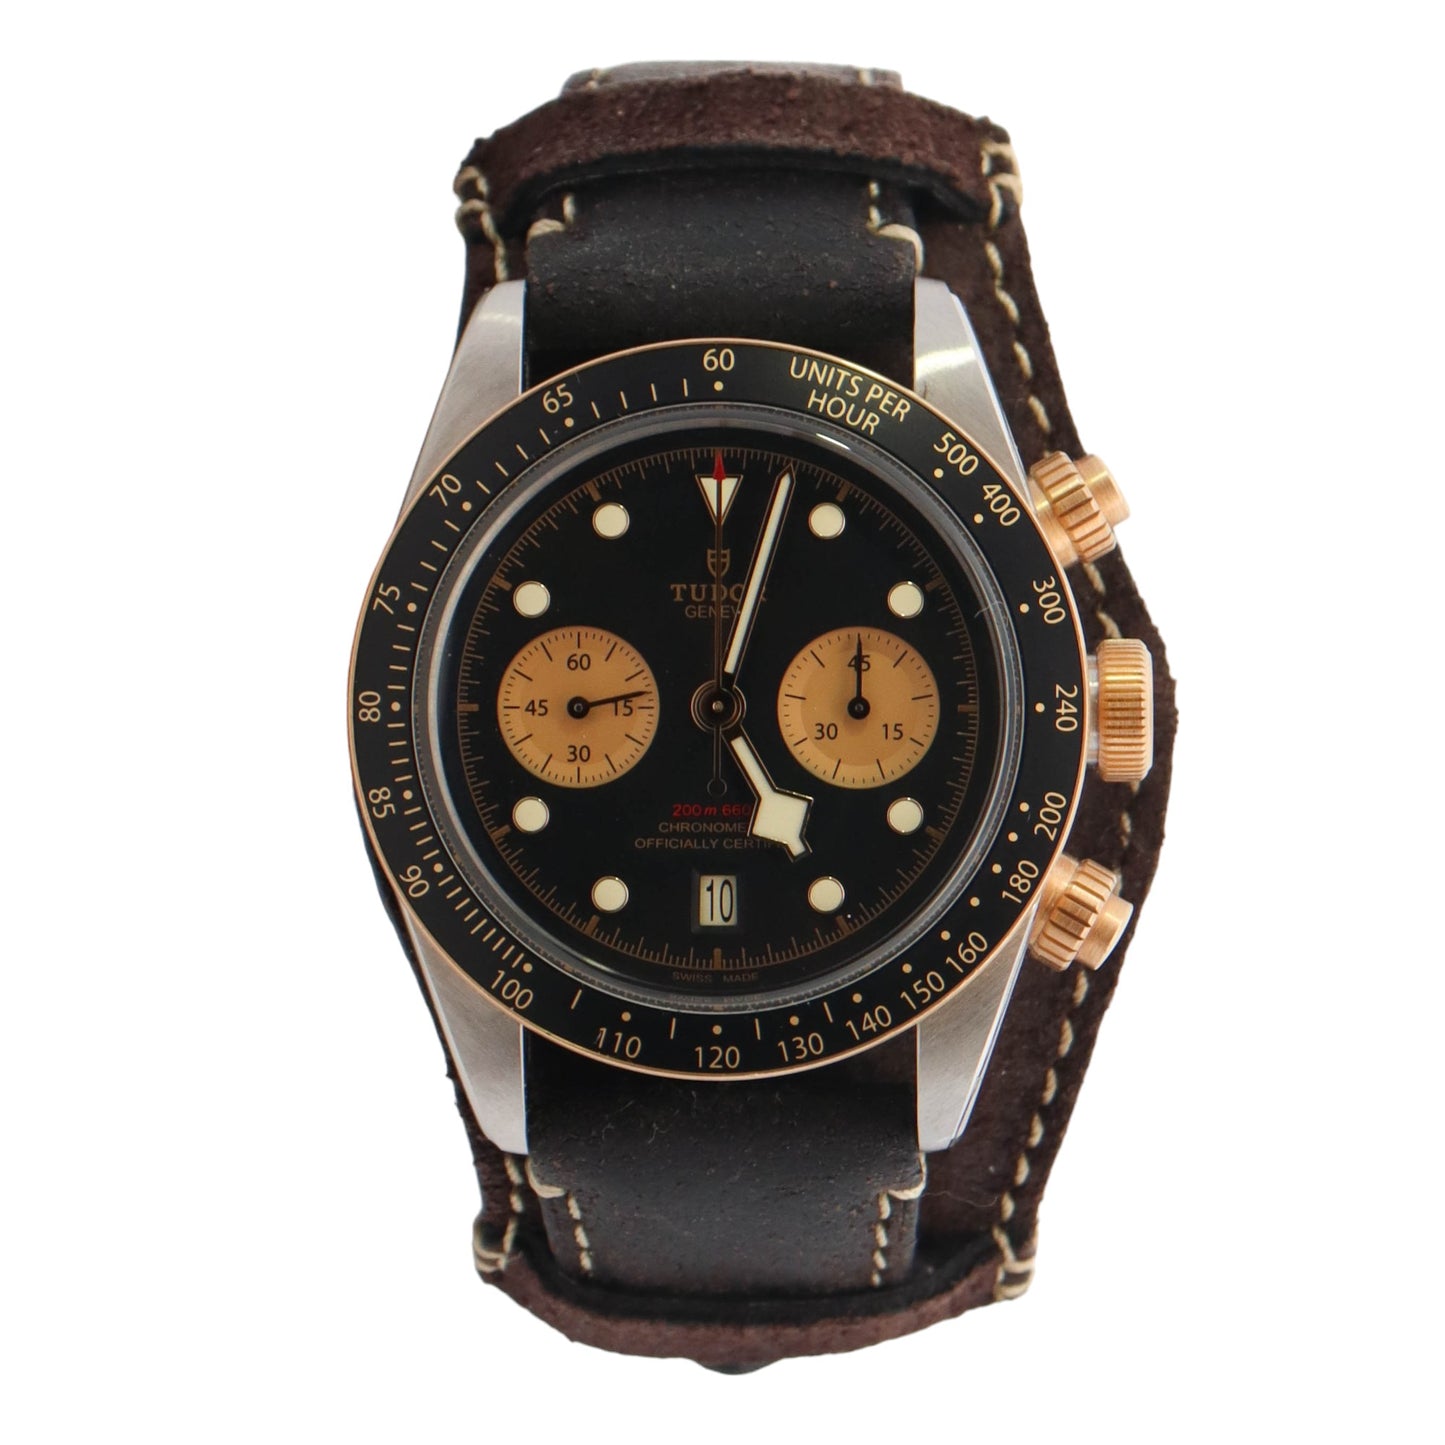 Tudor Black Bay Chrono Two Tone Stainless Steel & Yellow Gold 41mm Black Chronograph Dial Watch Reference# 79363N